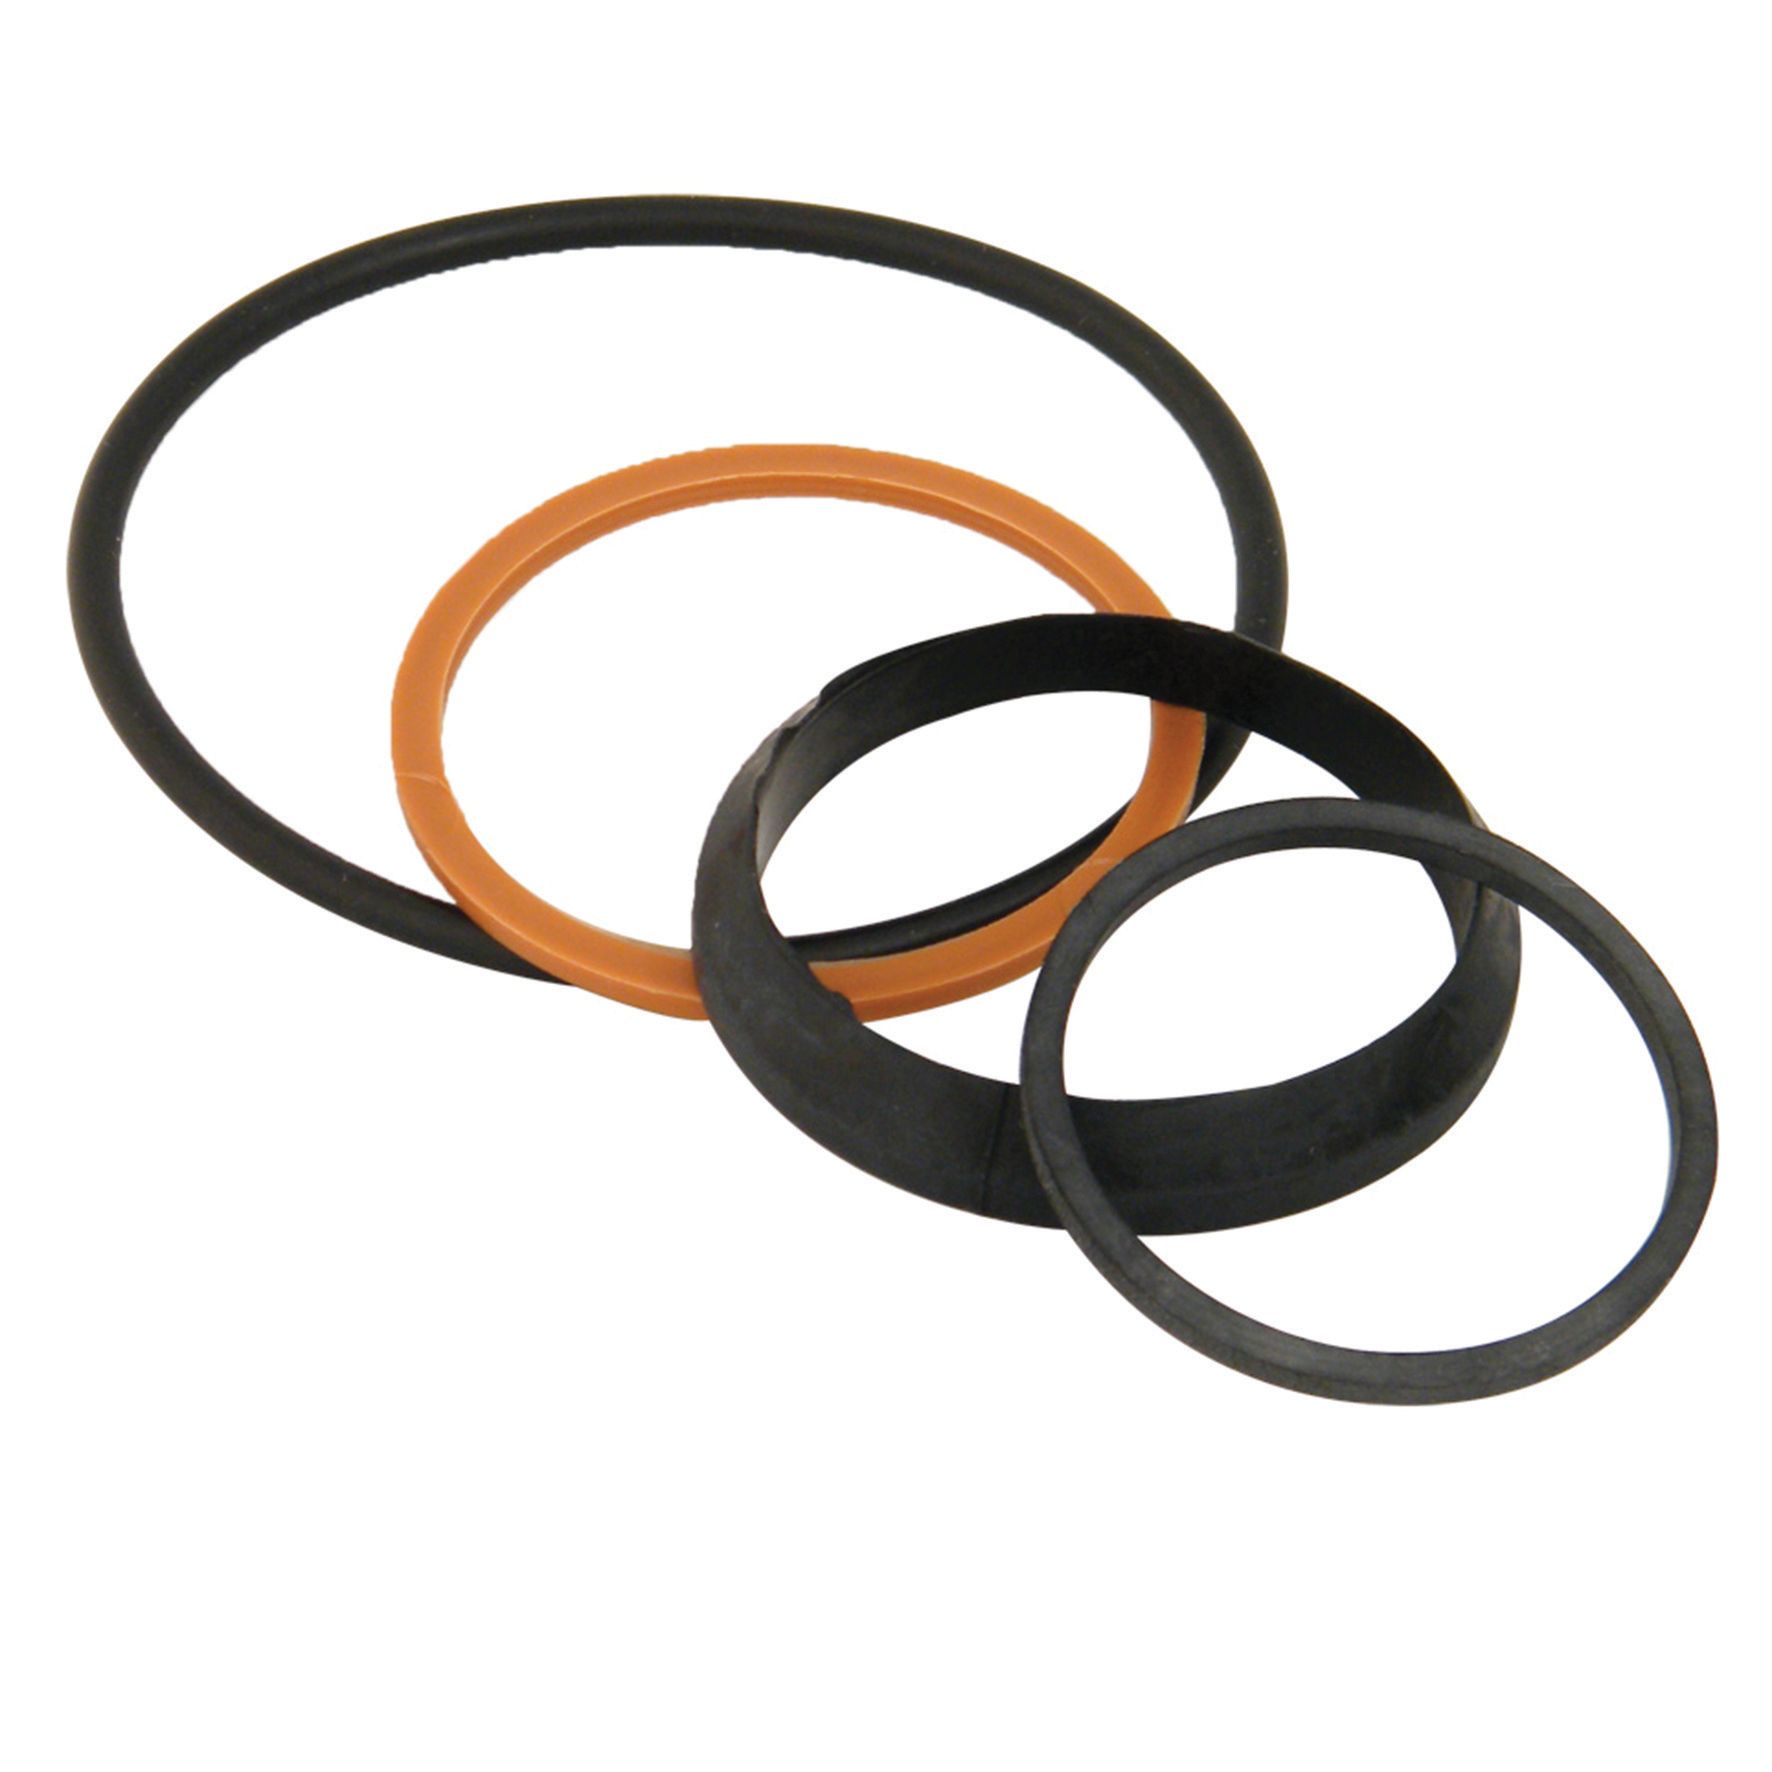 Image of FloPlast TK40 Replacement Trap Seal Kit - 40mm Pack of 4